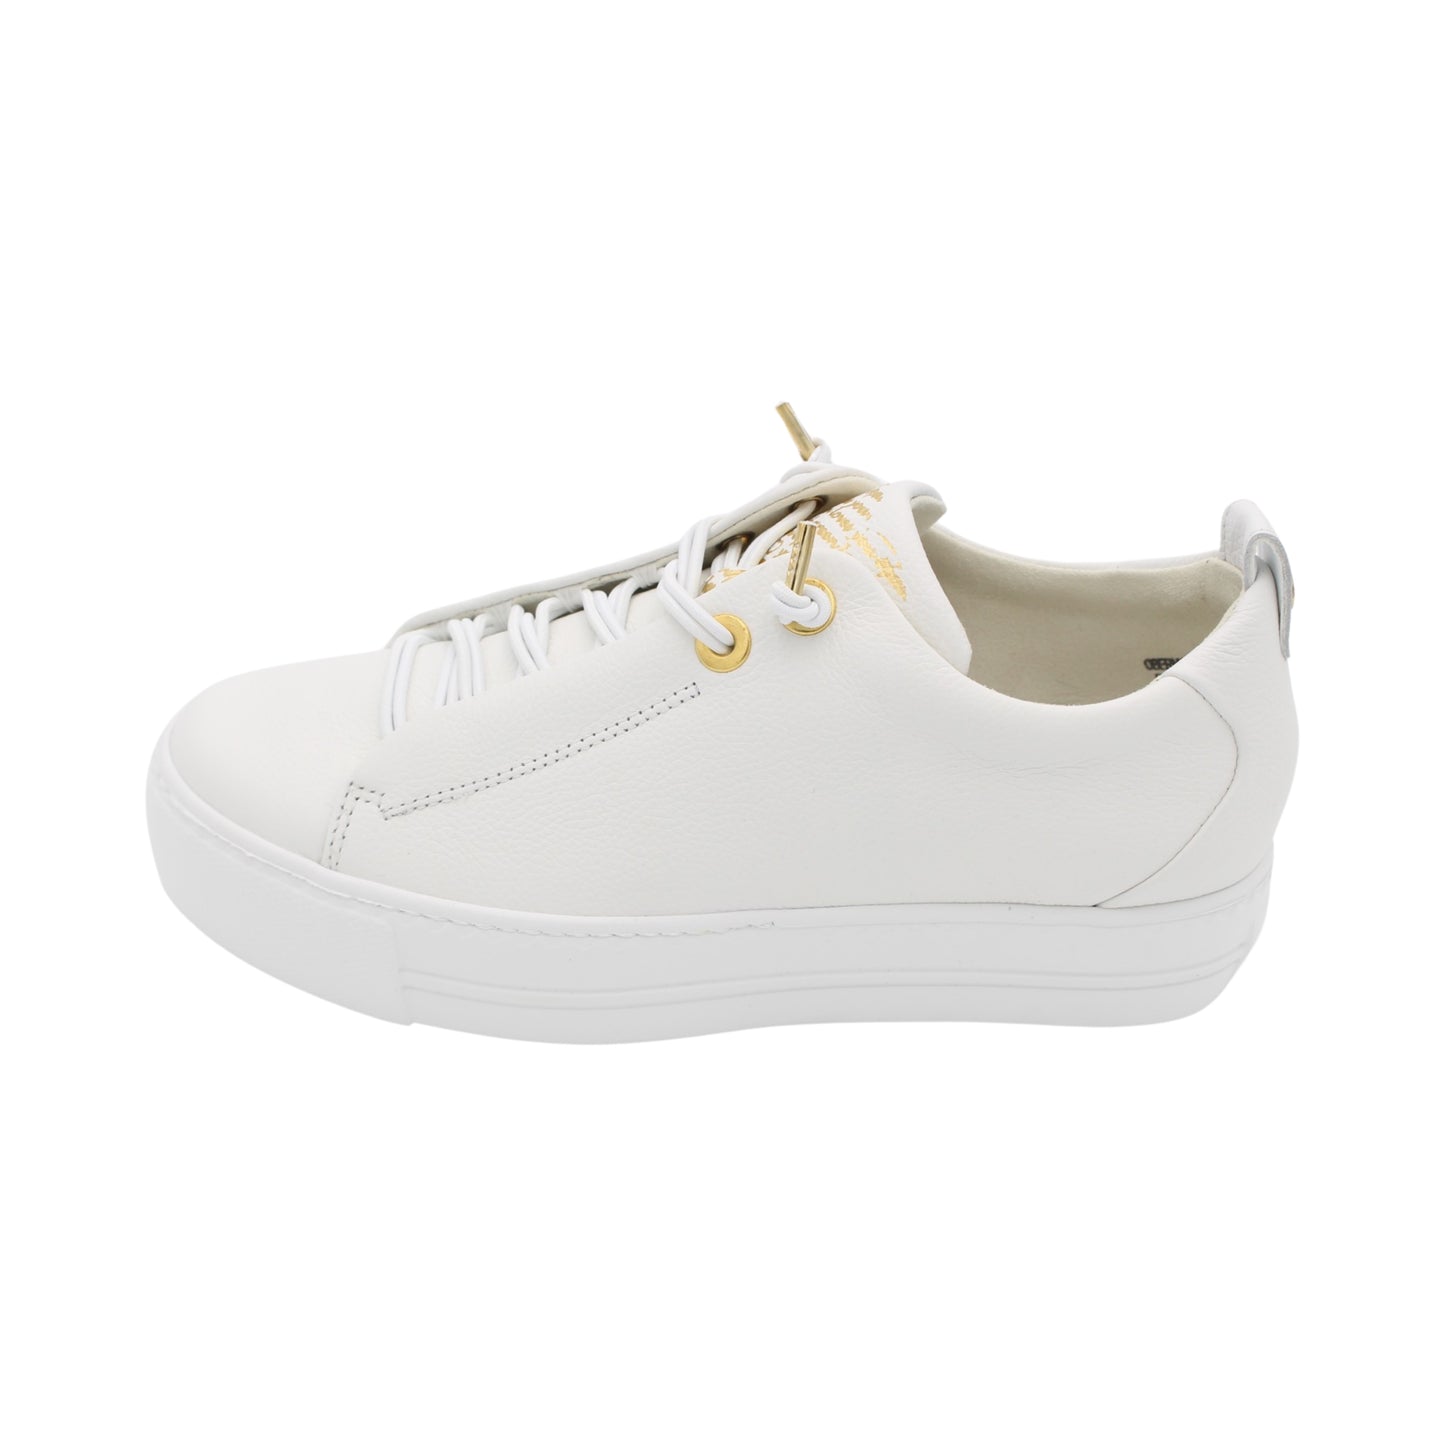 Paul Green - Ladies Shoes Trainers White, Gold (1842)